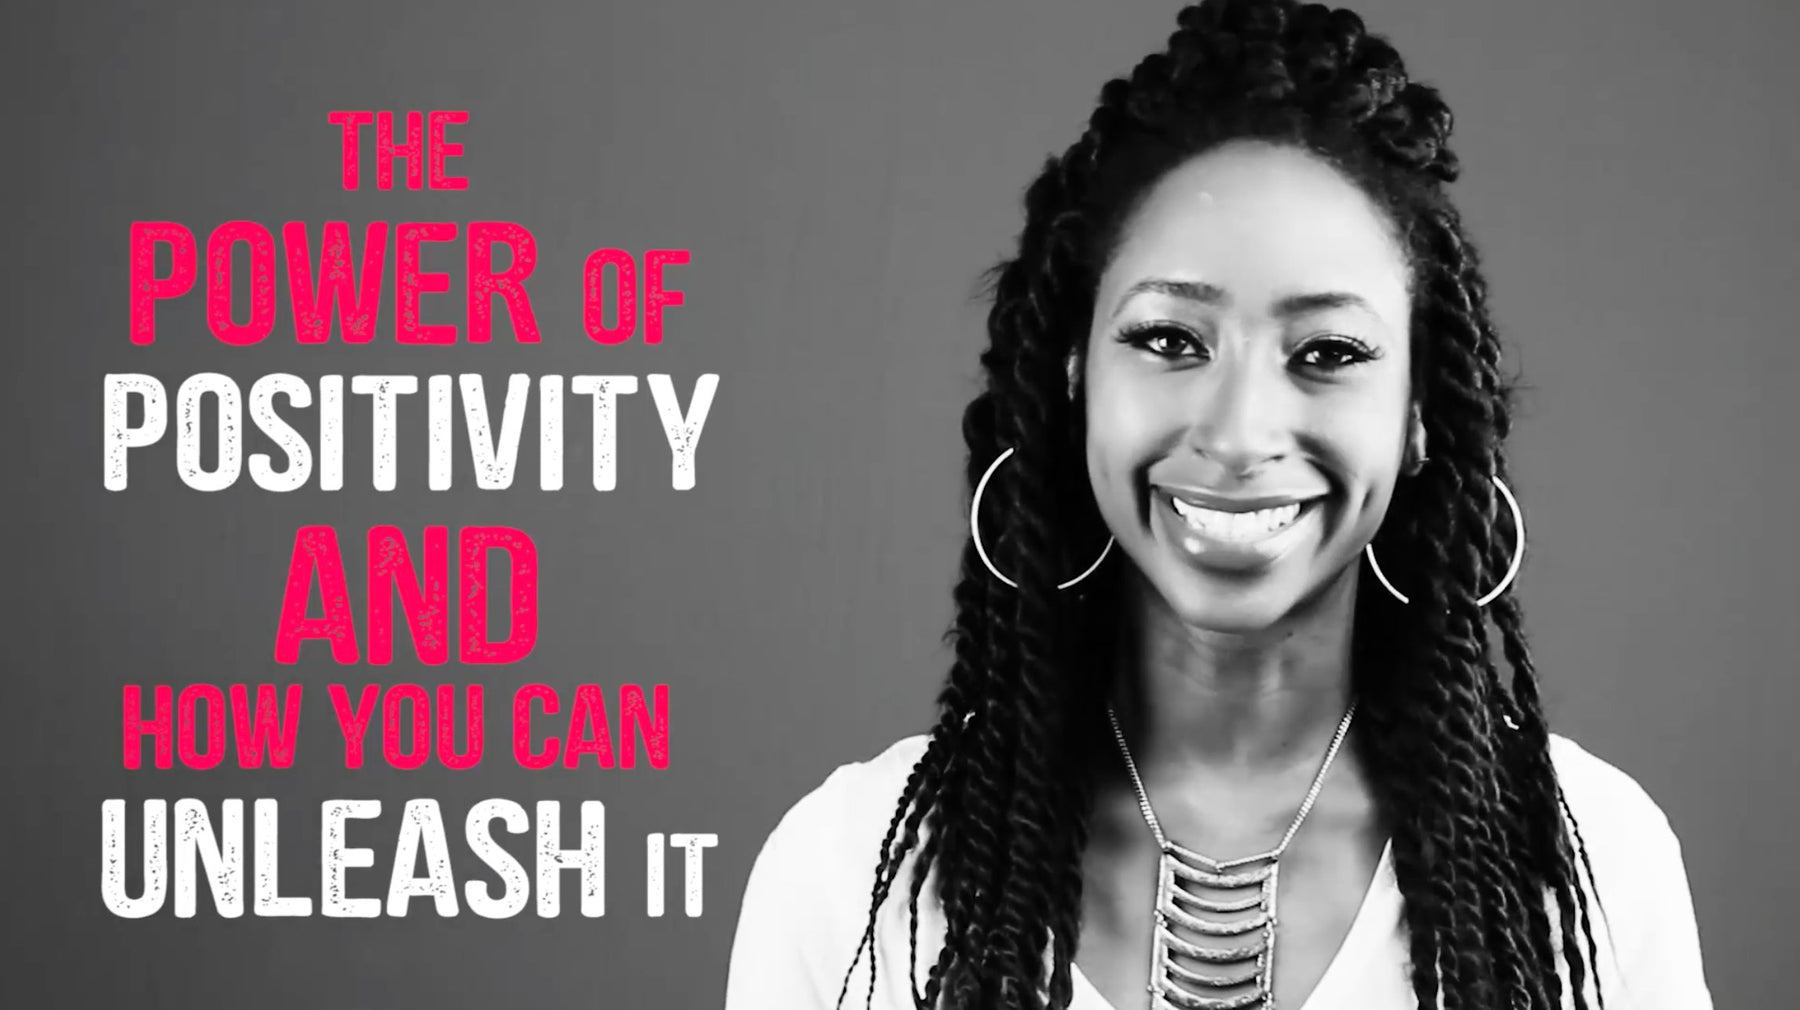 The Power Of Positivity... And How You Can Unleash It